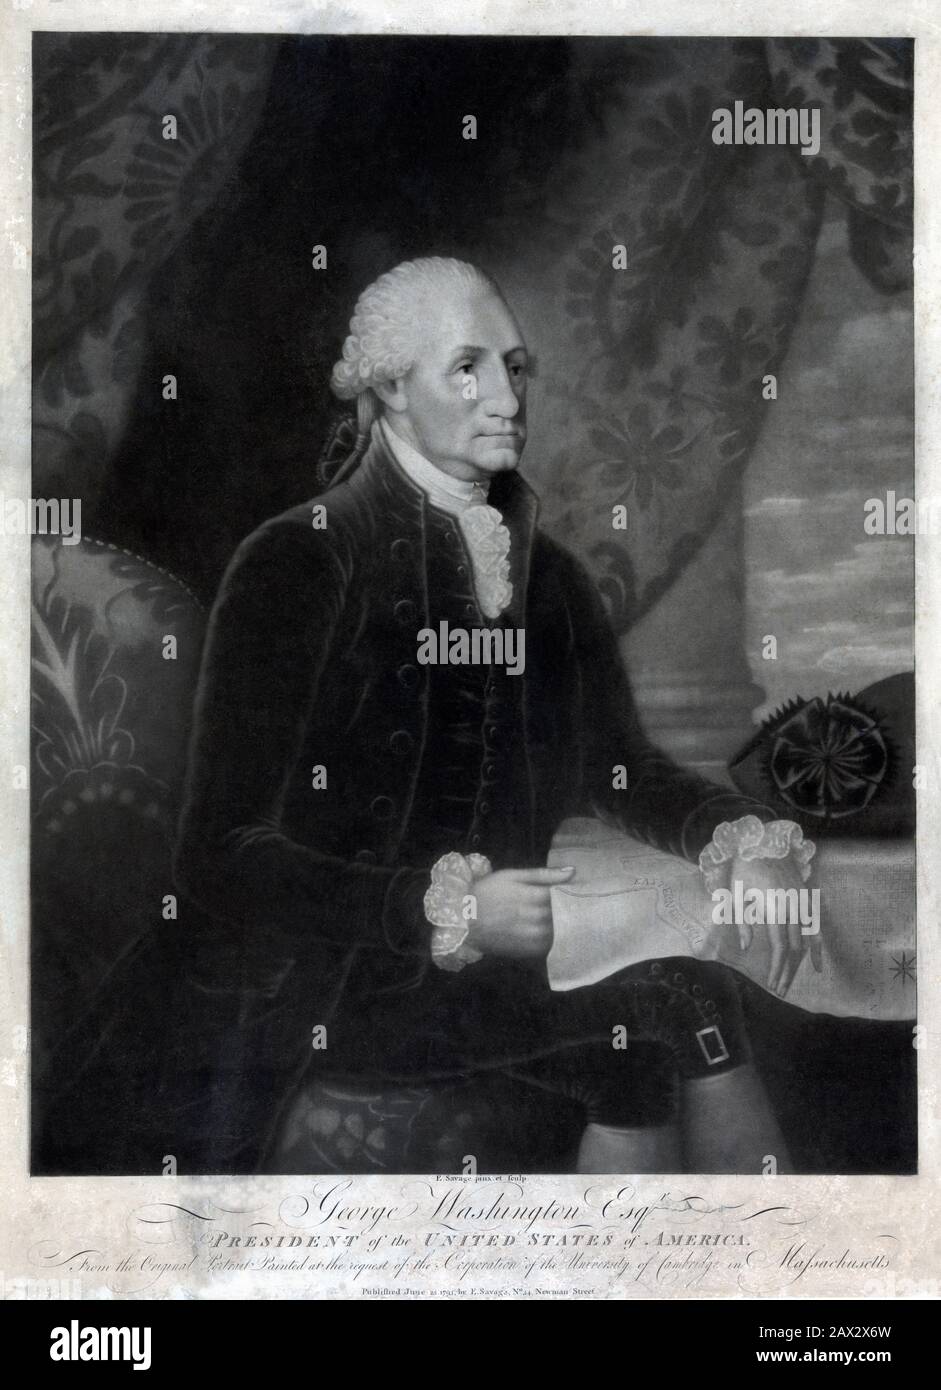 1793 ,  GEORGE WASHINGTON ( 1732 - 1799 ), portrait engraved by Edward Savage ( 1761 - 1817 ) . Print showing George Washington, seated, holding proposed plan for the new capitol city of Washington. Washington  led America's Continental Army to victory over Britain in the American Revolutionary War ( 1775 – 1783 ), and in 1789 was elected the first President of the United States of America. He served two four-year terms from 1789 to 1797, winning reelection in 1792 . Portrait by painter GILBERT STUART ( 1795 - 1796 ) , Washington , National Gallery of Art - POLITICO - POLITICA - POLITIC  -  ST Stock Photo